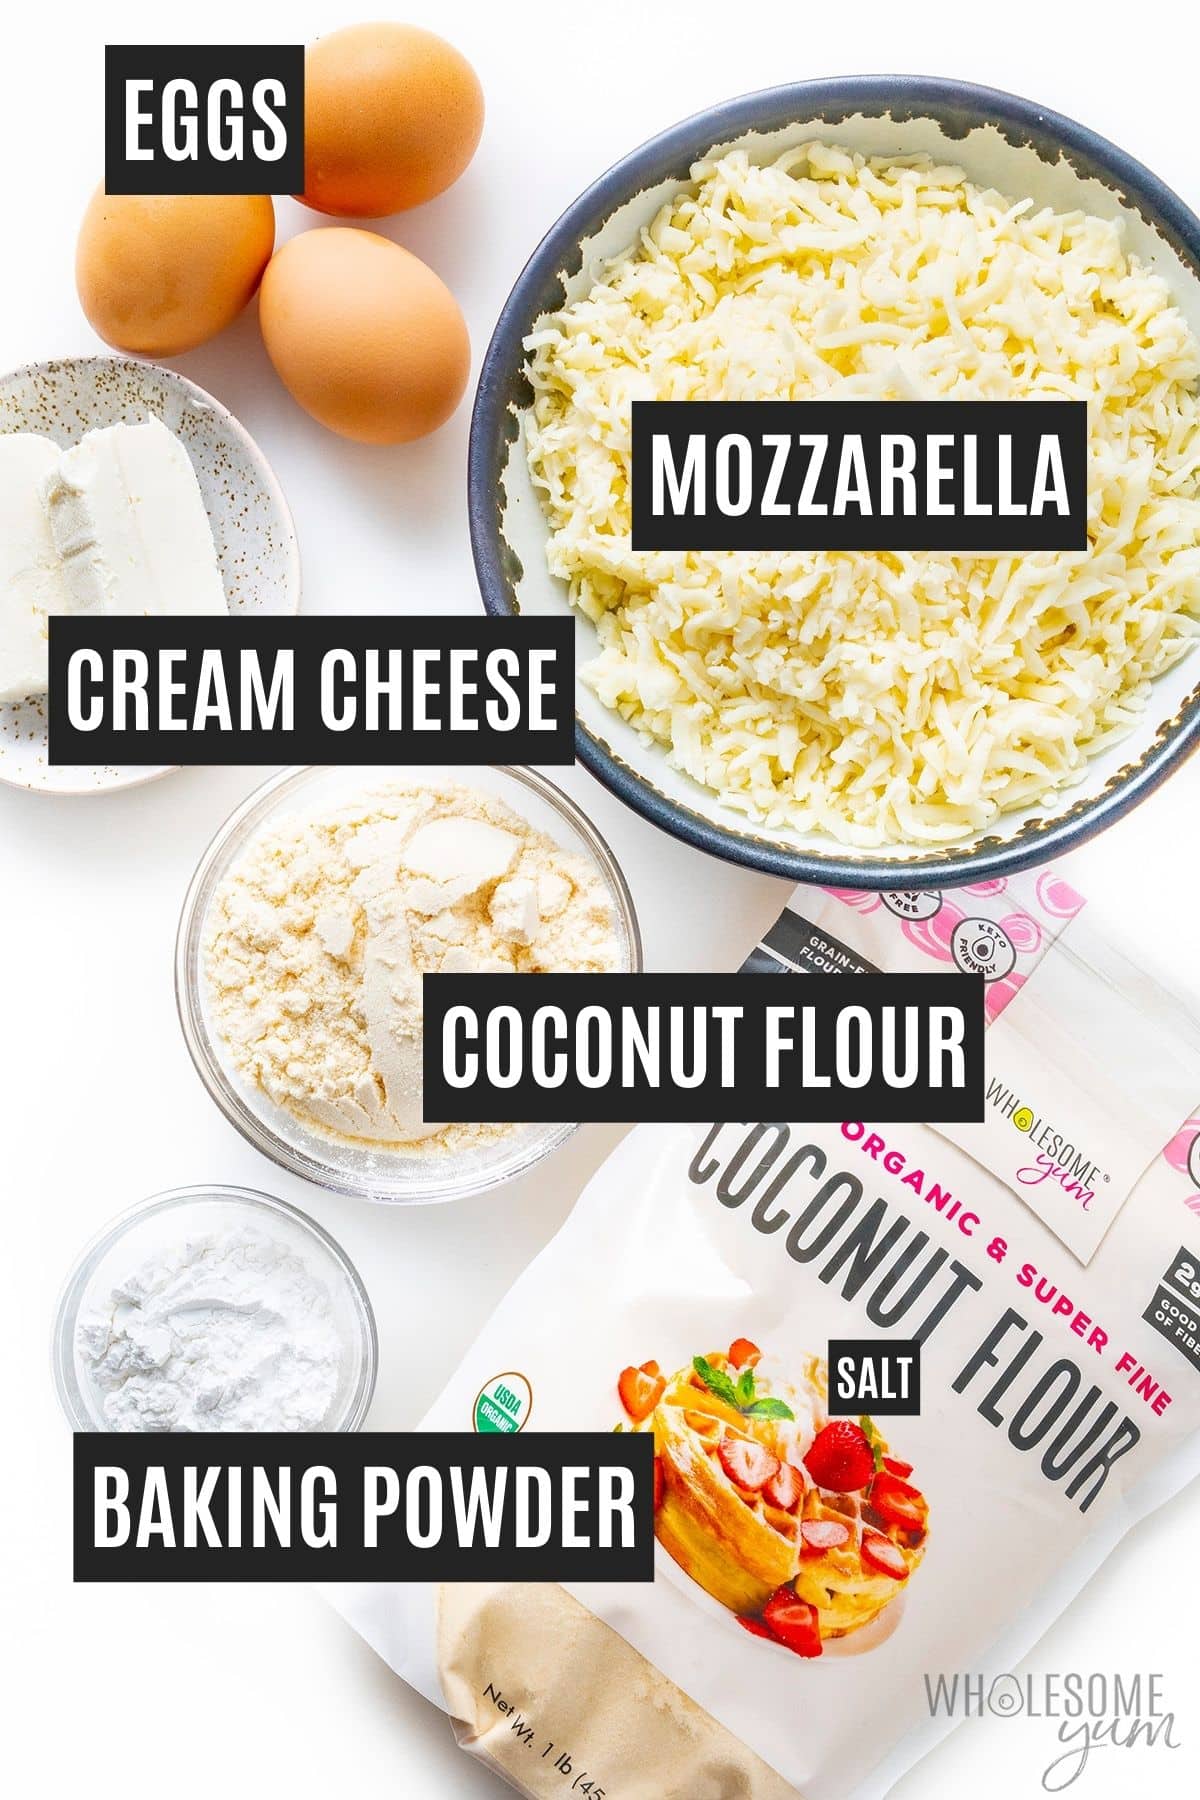 Coconut flour, cheeses, baking powder, and eggs.